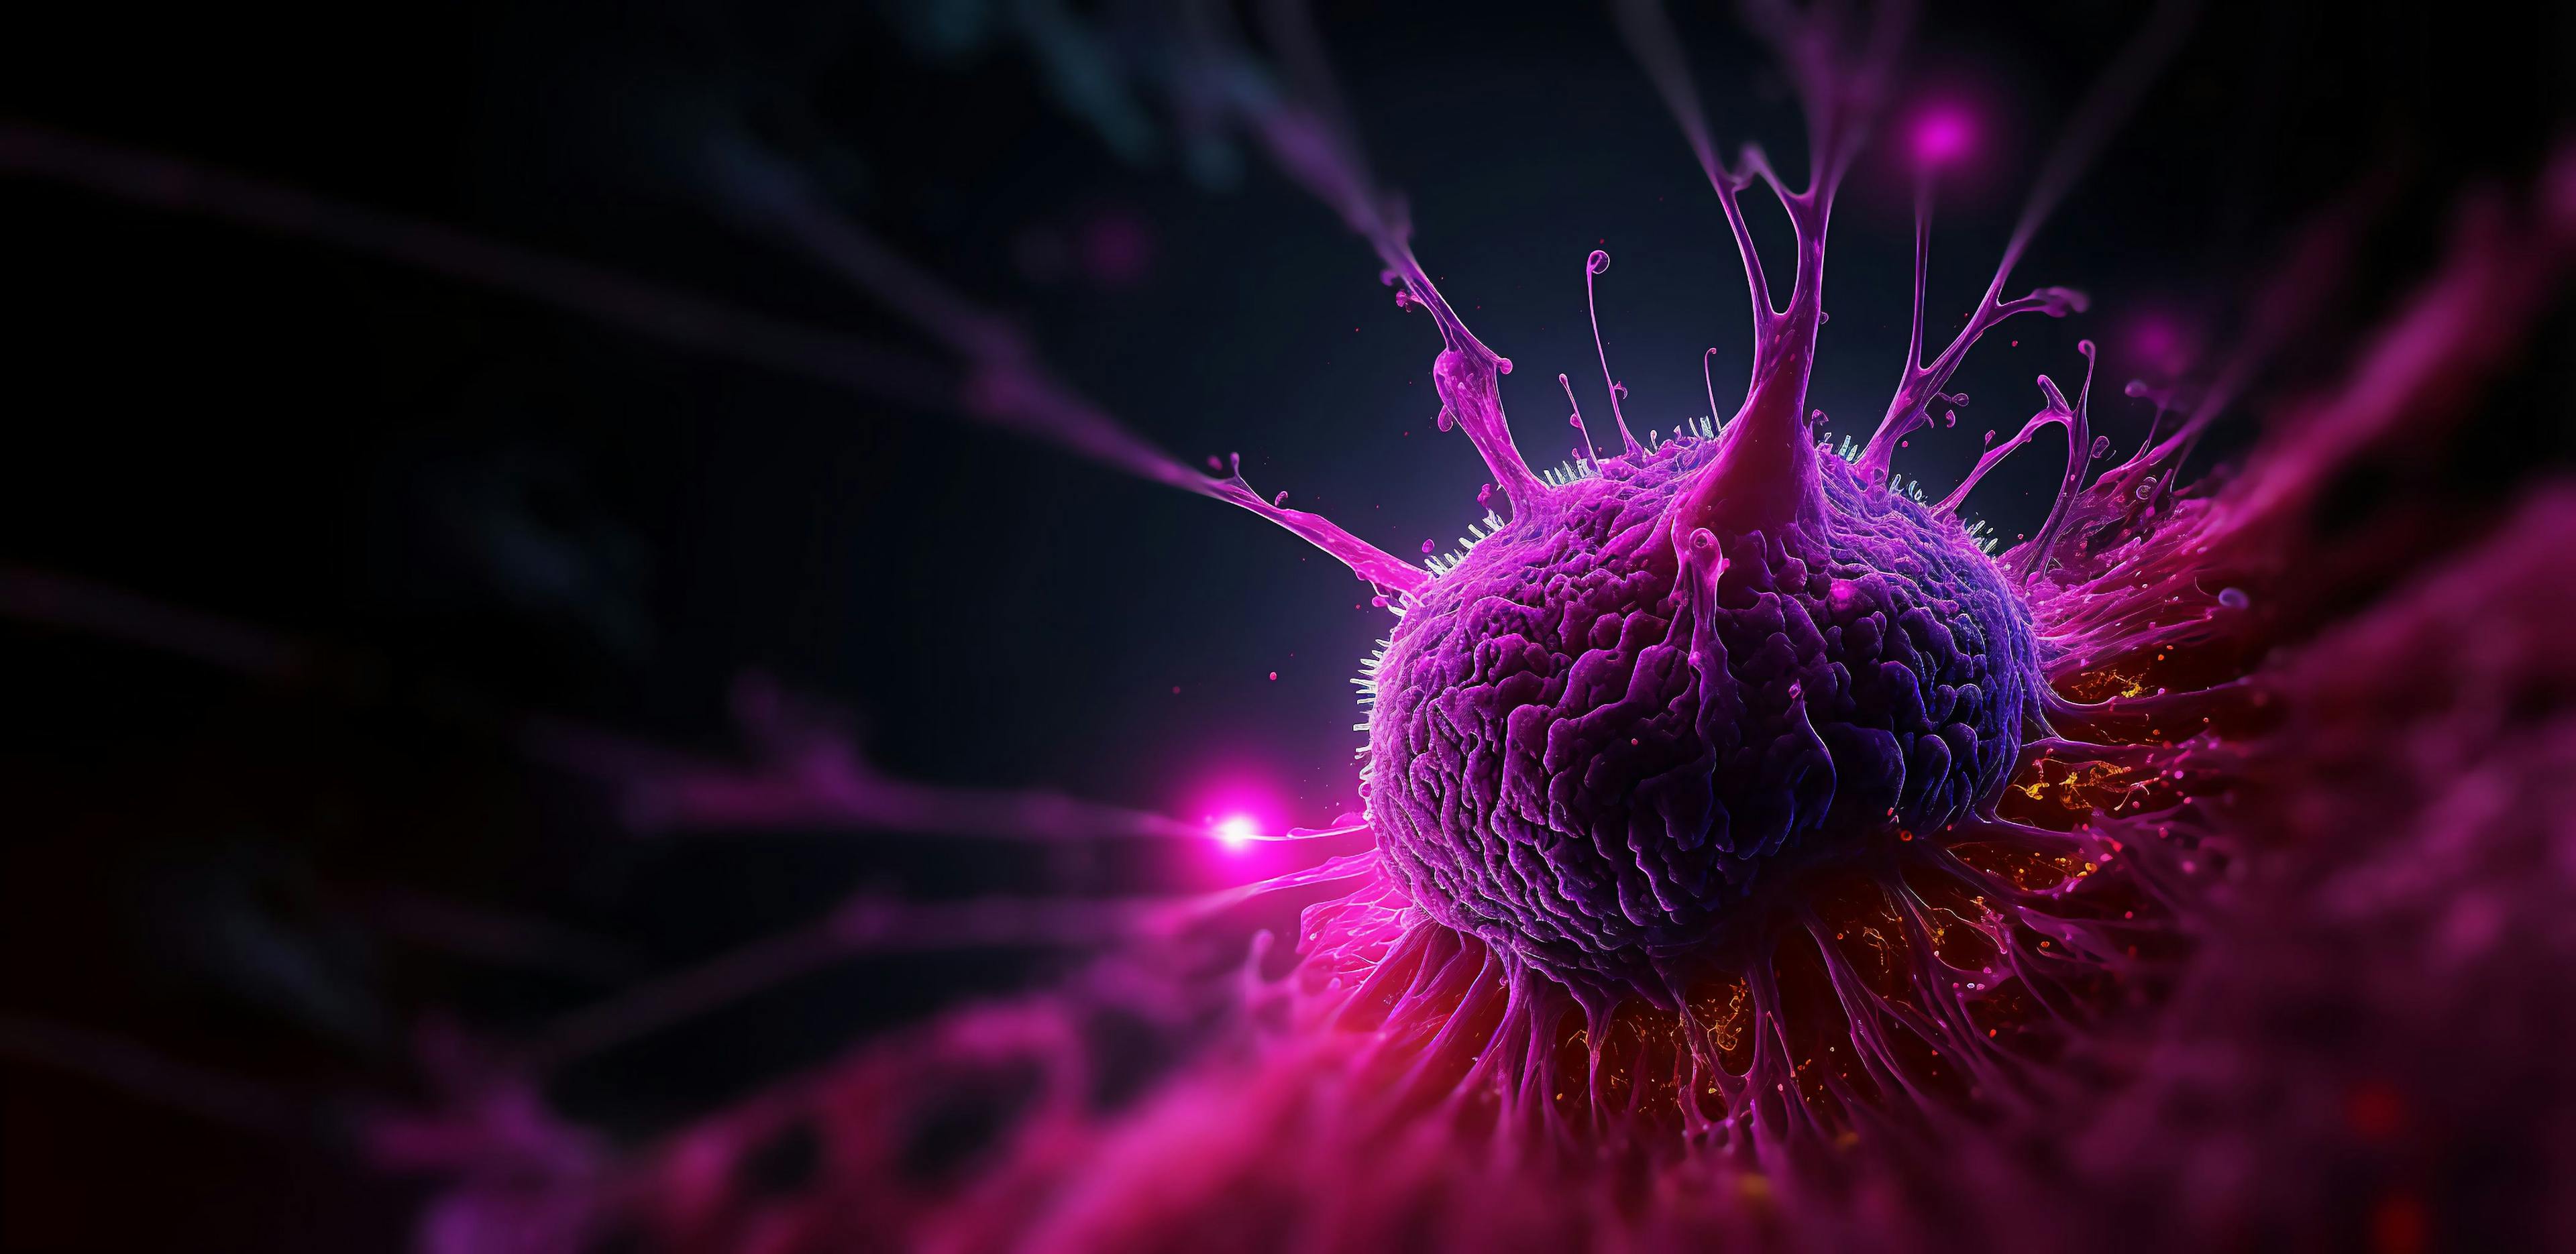 Tumor microenvironment concept with cancer cells, T-Cells, nanoparticles, cancer associated fibroblast layer of tumor microenvironment normal cells, molecules, and blood vessels 3d rendering - Image credit: Catalin | stock.adobe.com